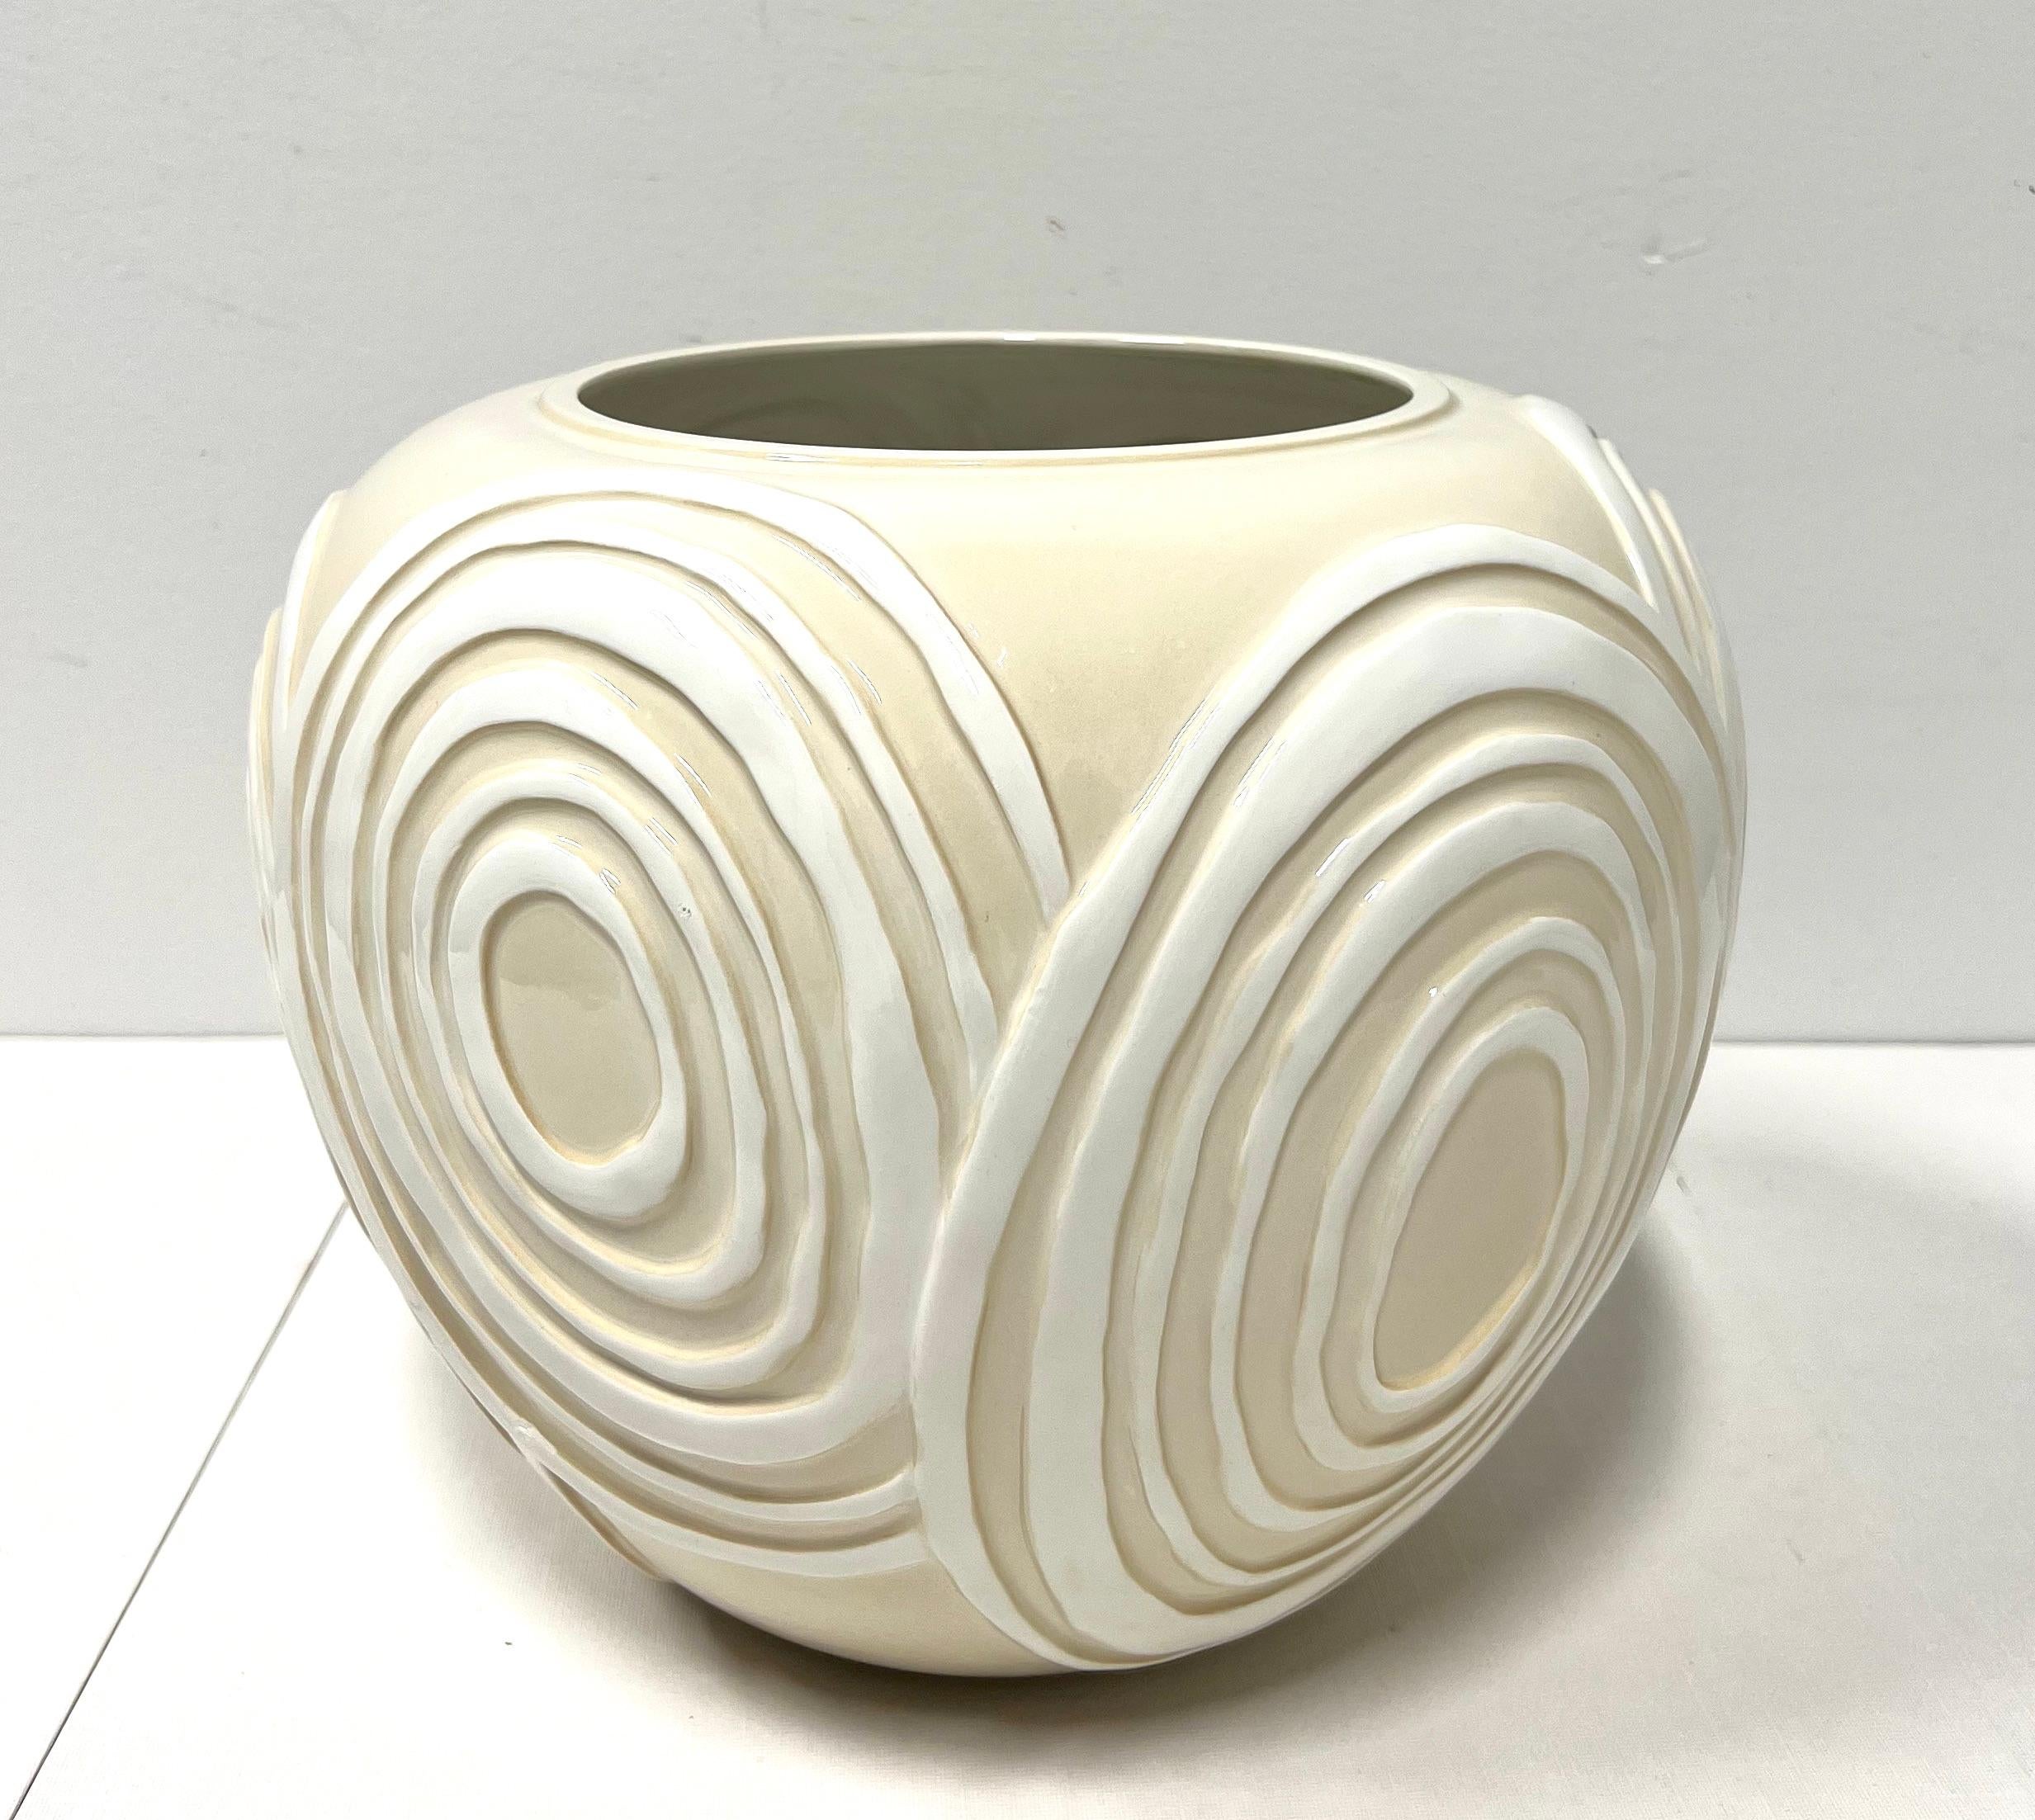 A Contemporary style decorative ceramic centerpiece bowl, unbranded. Beige in color with white swirl patterns throughout. Origin unknown, circa 1980's.

Measures:  11w 11d 9.5h, Weighs Approximately: 4 lbs

Outstanding vintage condition with signs